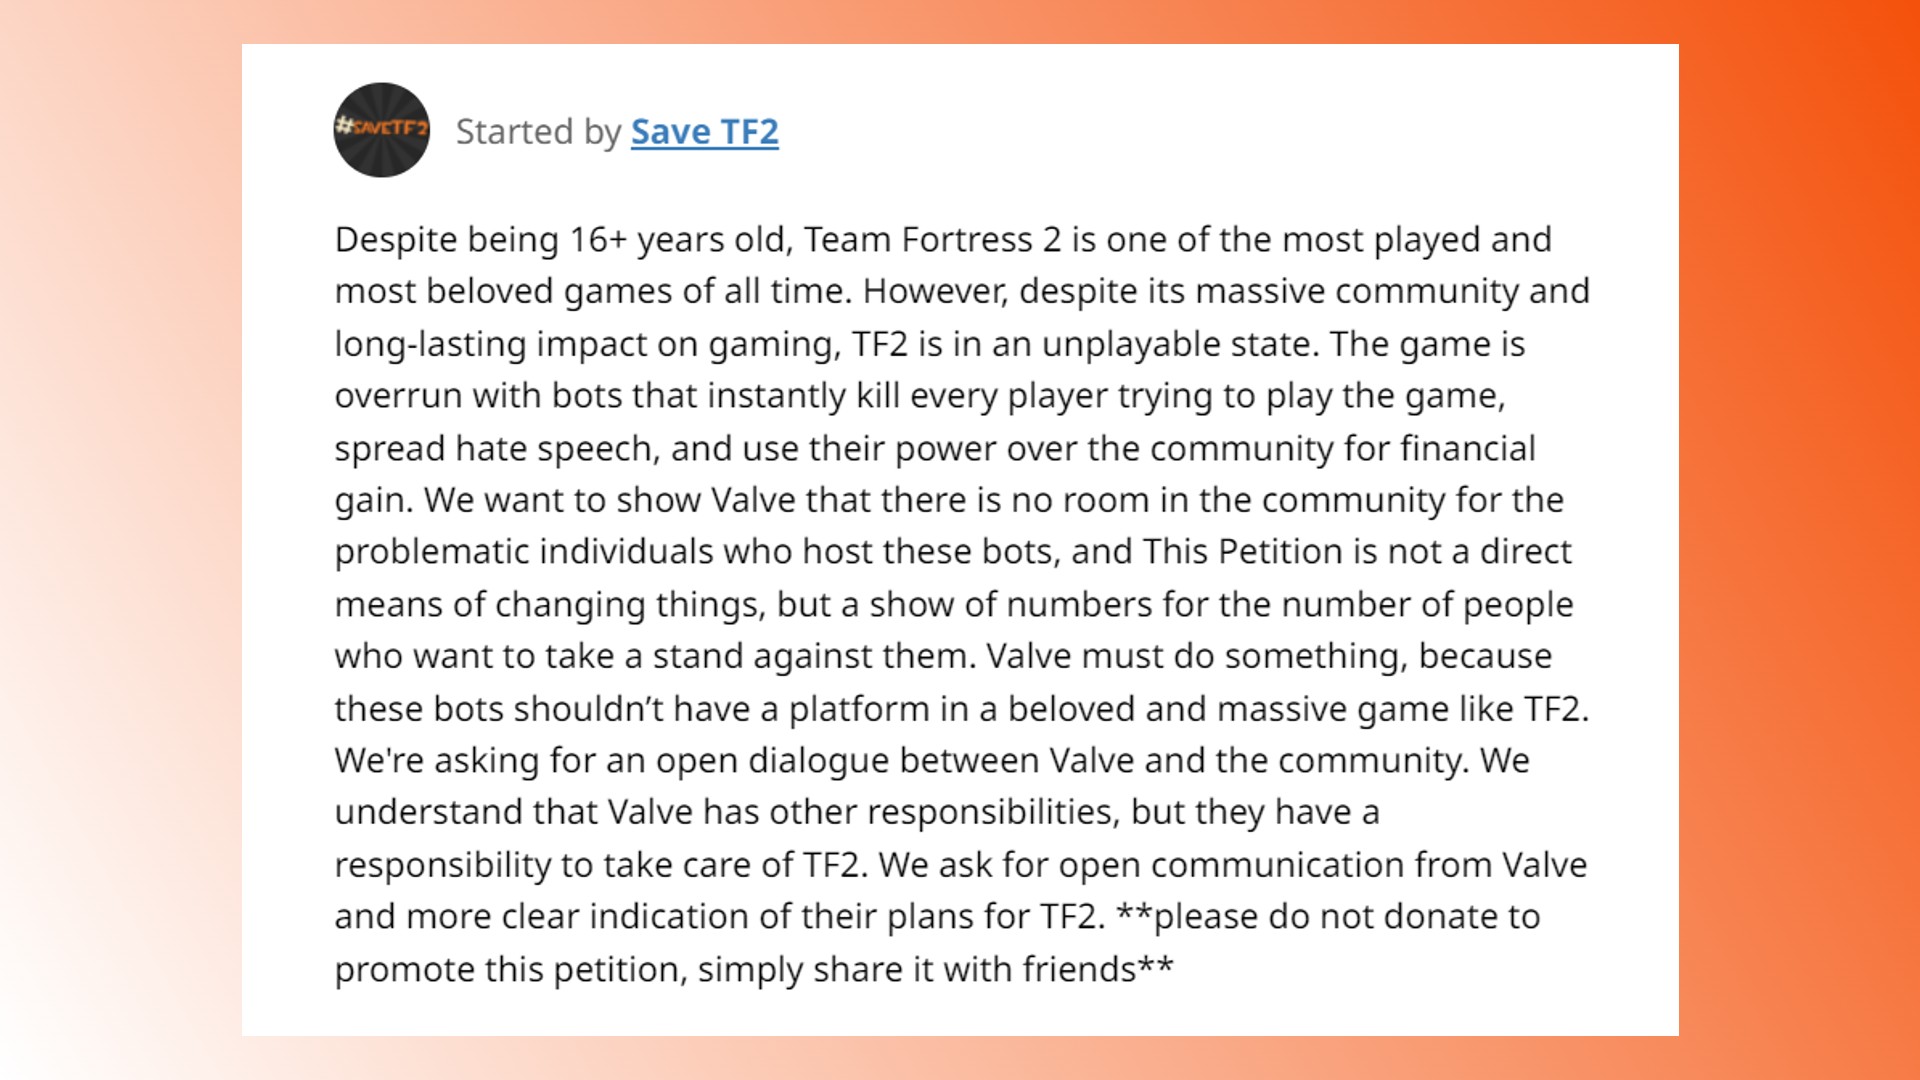 Team Fortress 2 save TF2 petition: A petition for Valve to save FPS game Team Fortress 2